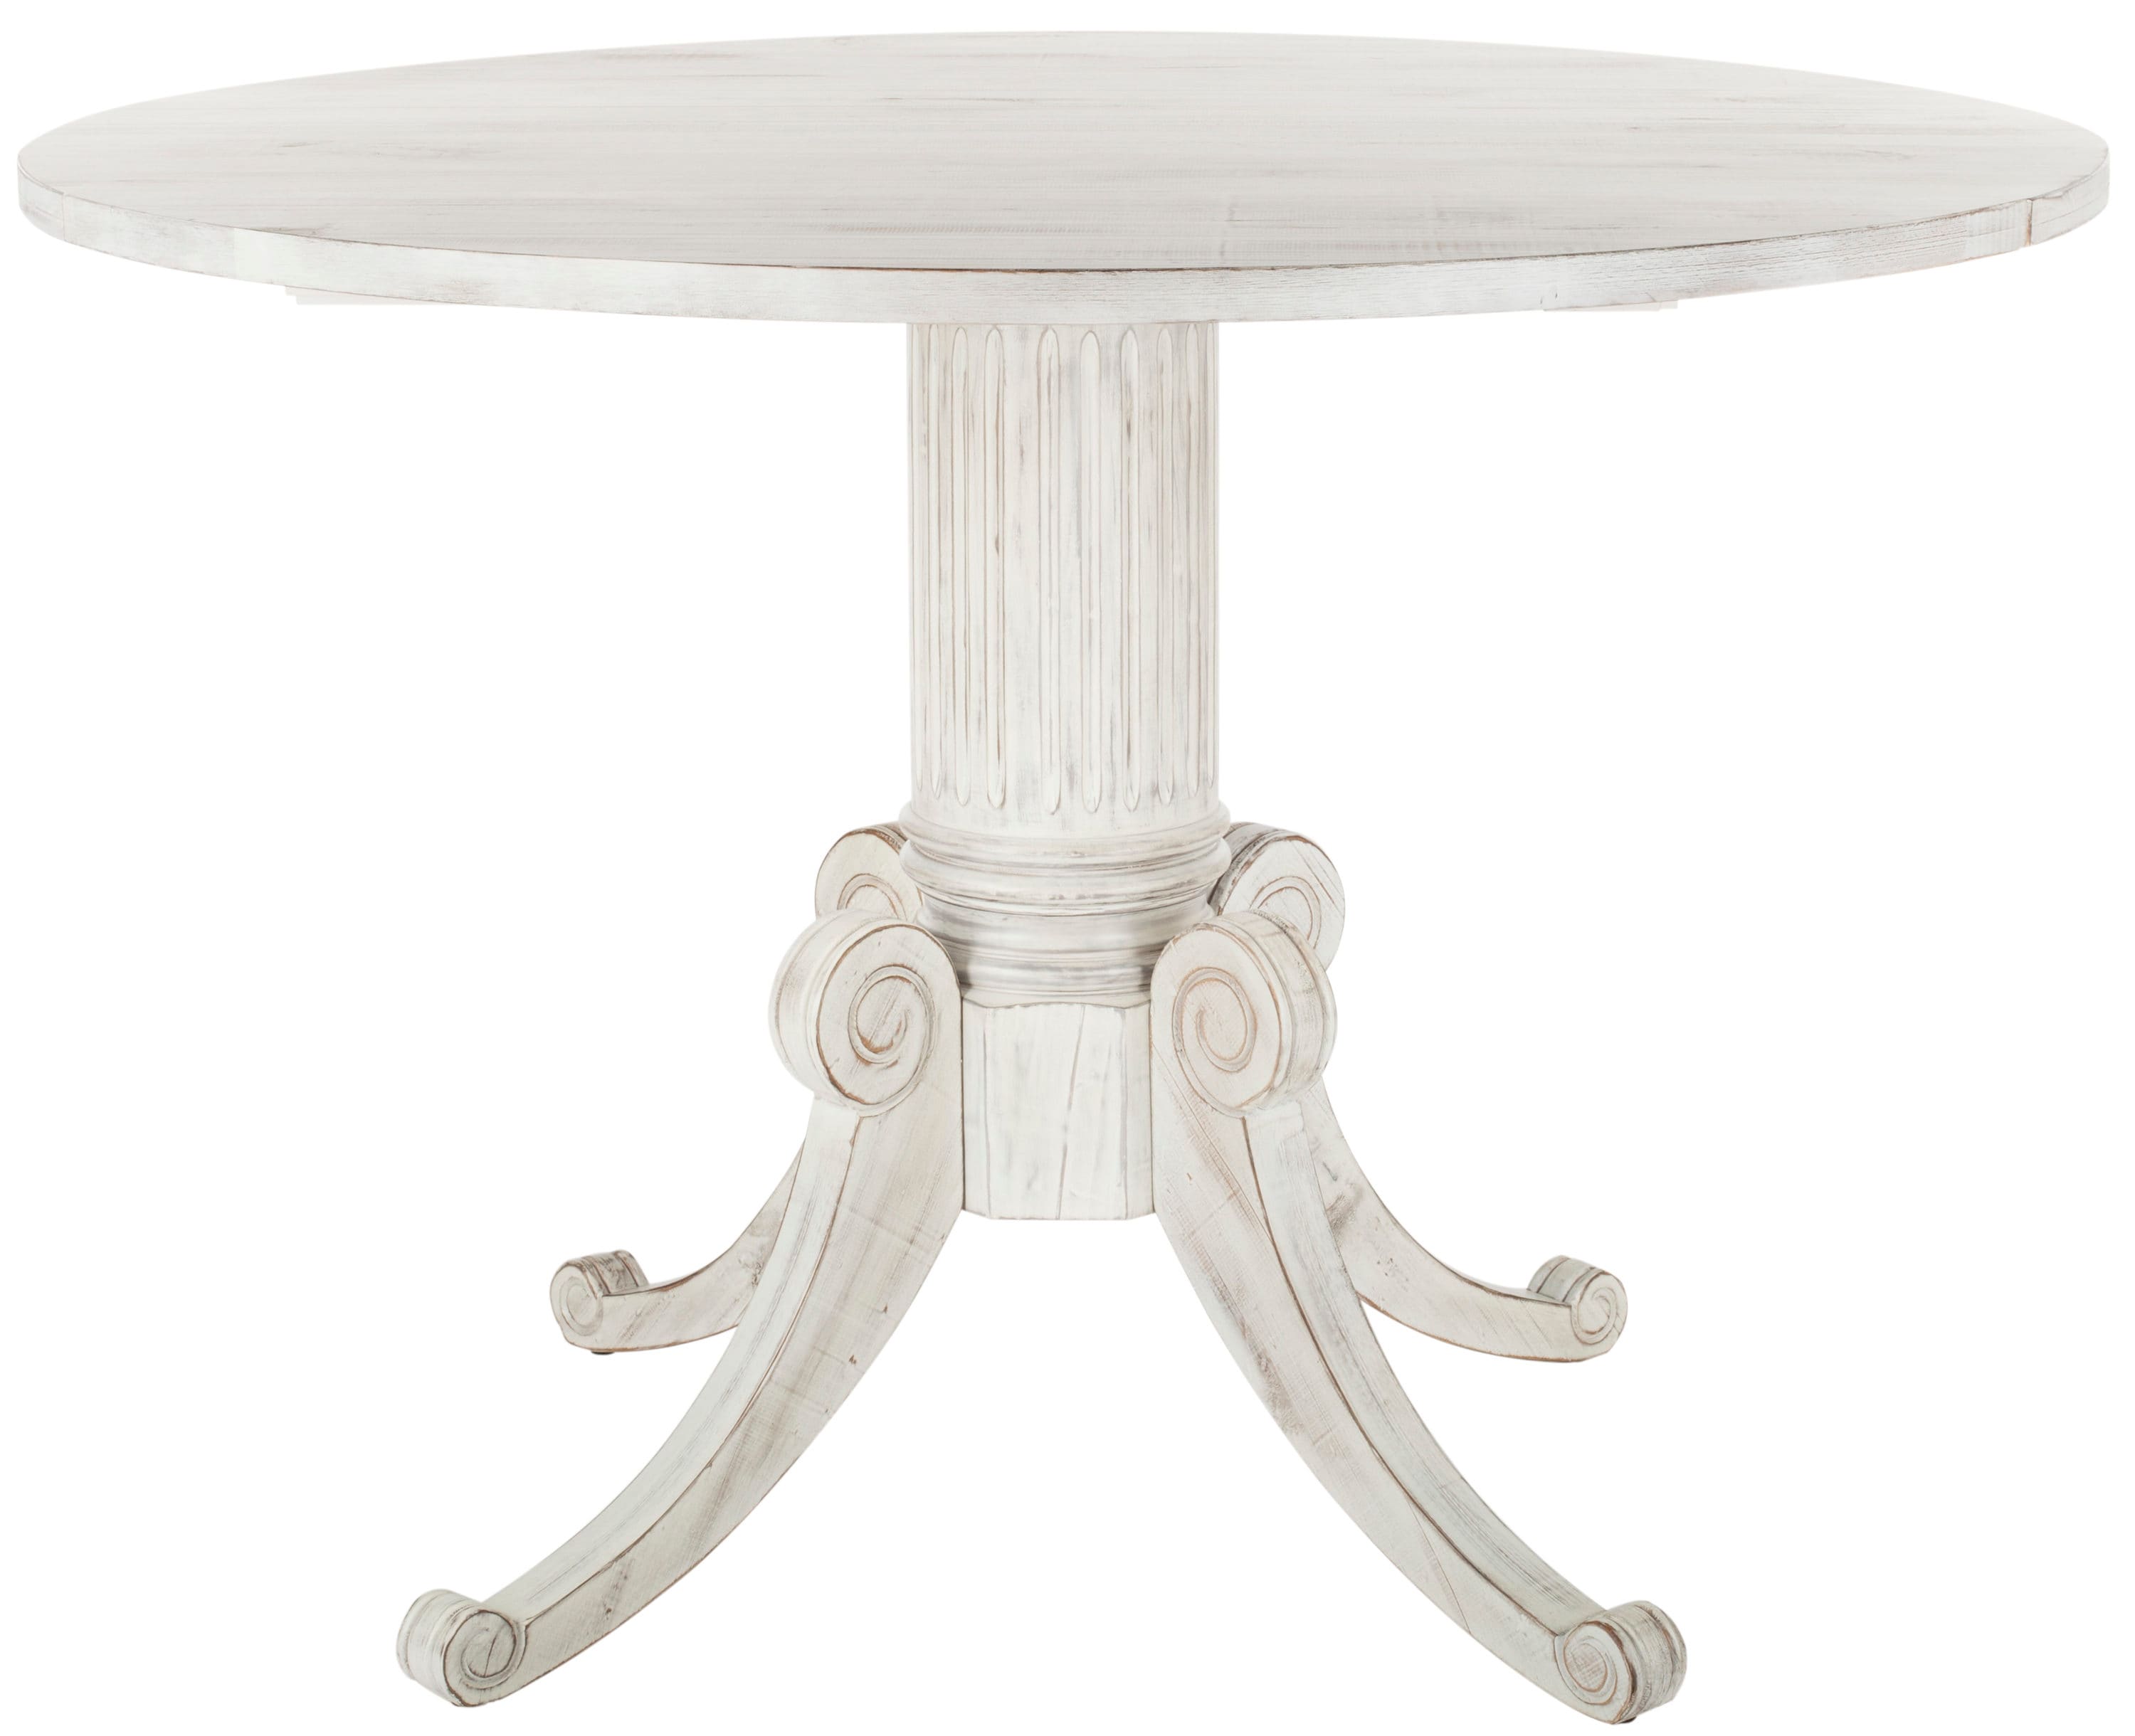 Safavieh Forest Antique White Round, White Round Dining Table With Leaves